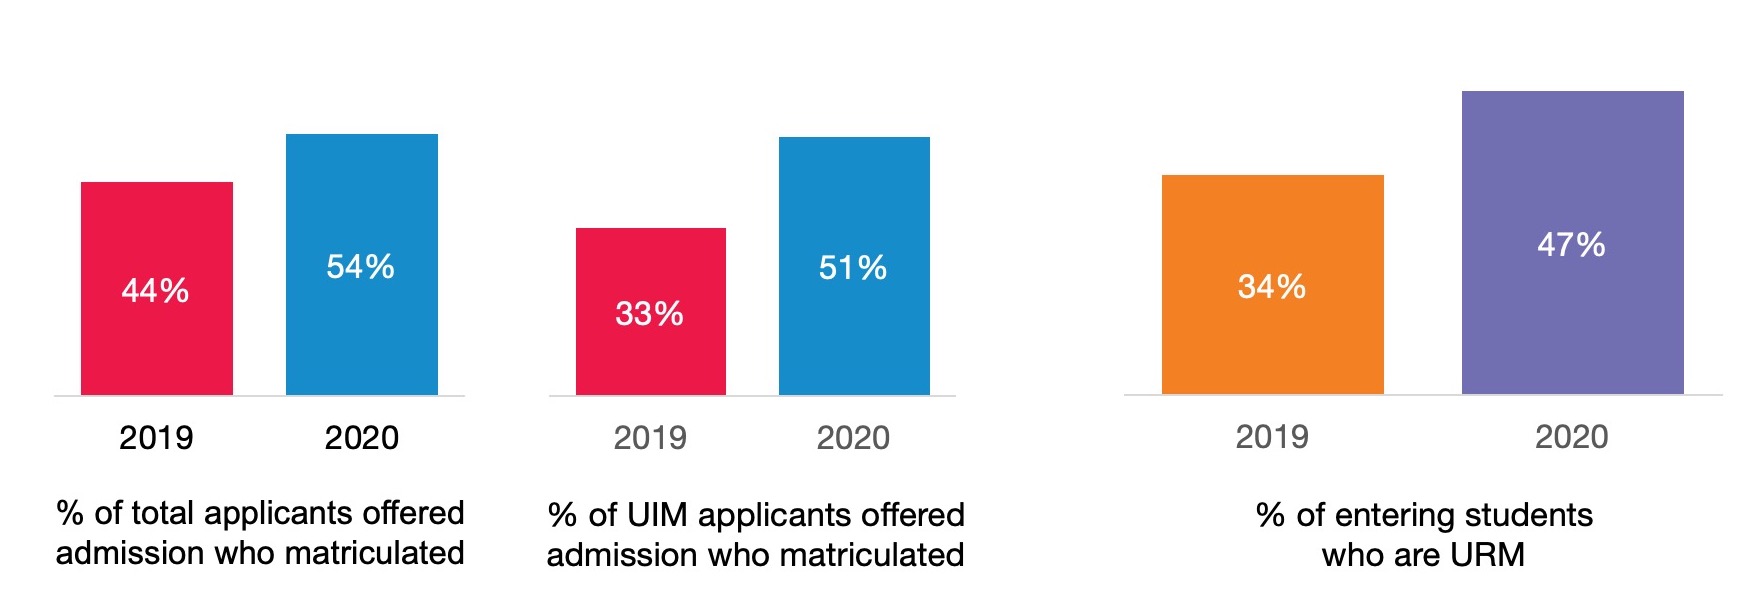 Chart explanation: % of total applicants offered admission who matriculated: 2019 44%; 2020 54%. %of UIM applicants offered admission who matriculated: 2019 33%; 2020 51%. % of entering class comprised of UIM students: 2019 34%; 2020: 47% 